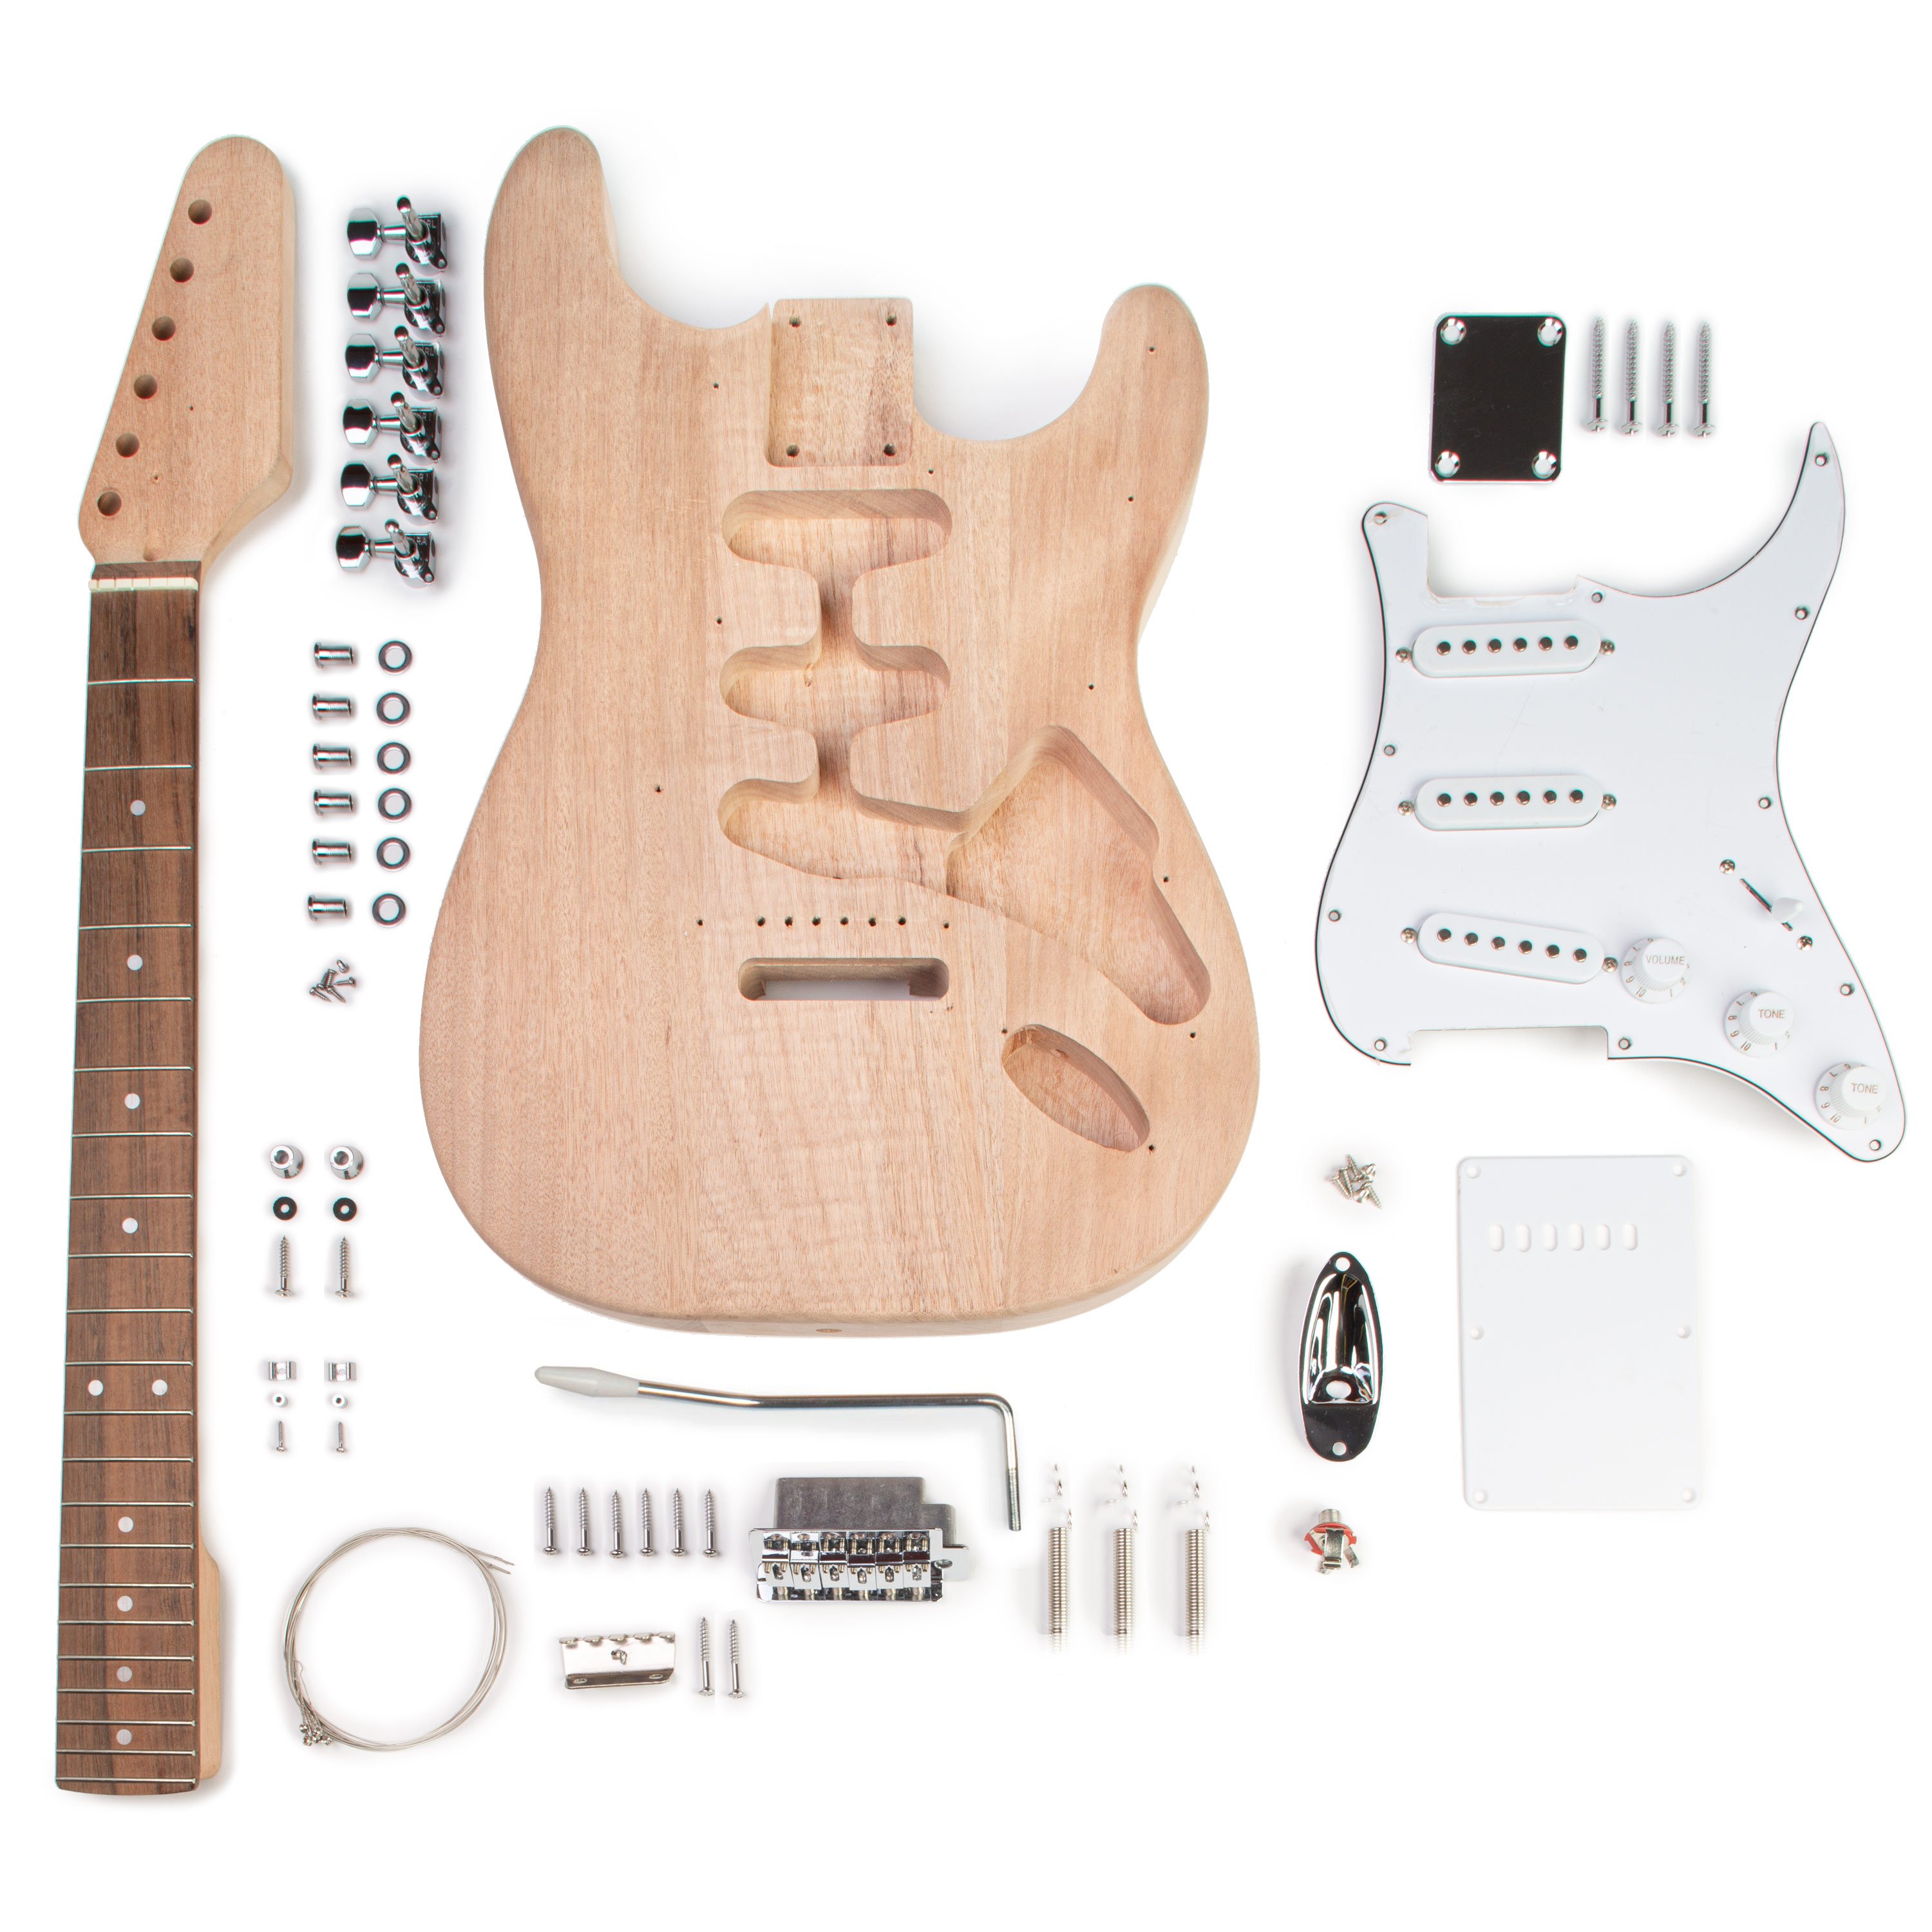 High Quality Guitar Kit - S-Style Electric Guitar Kit from StewMac.